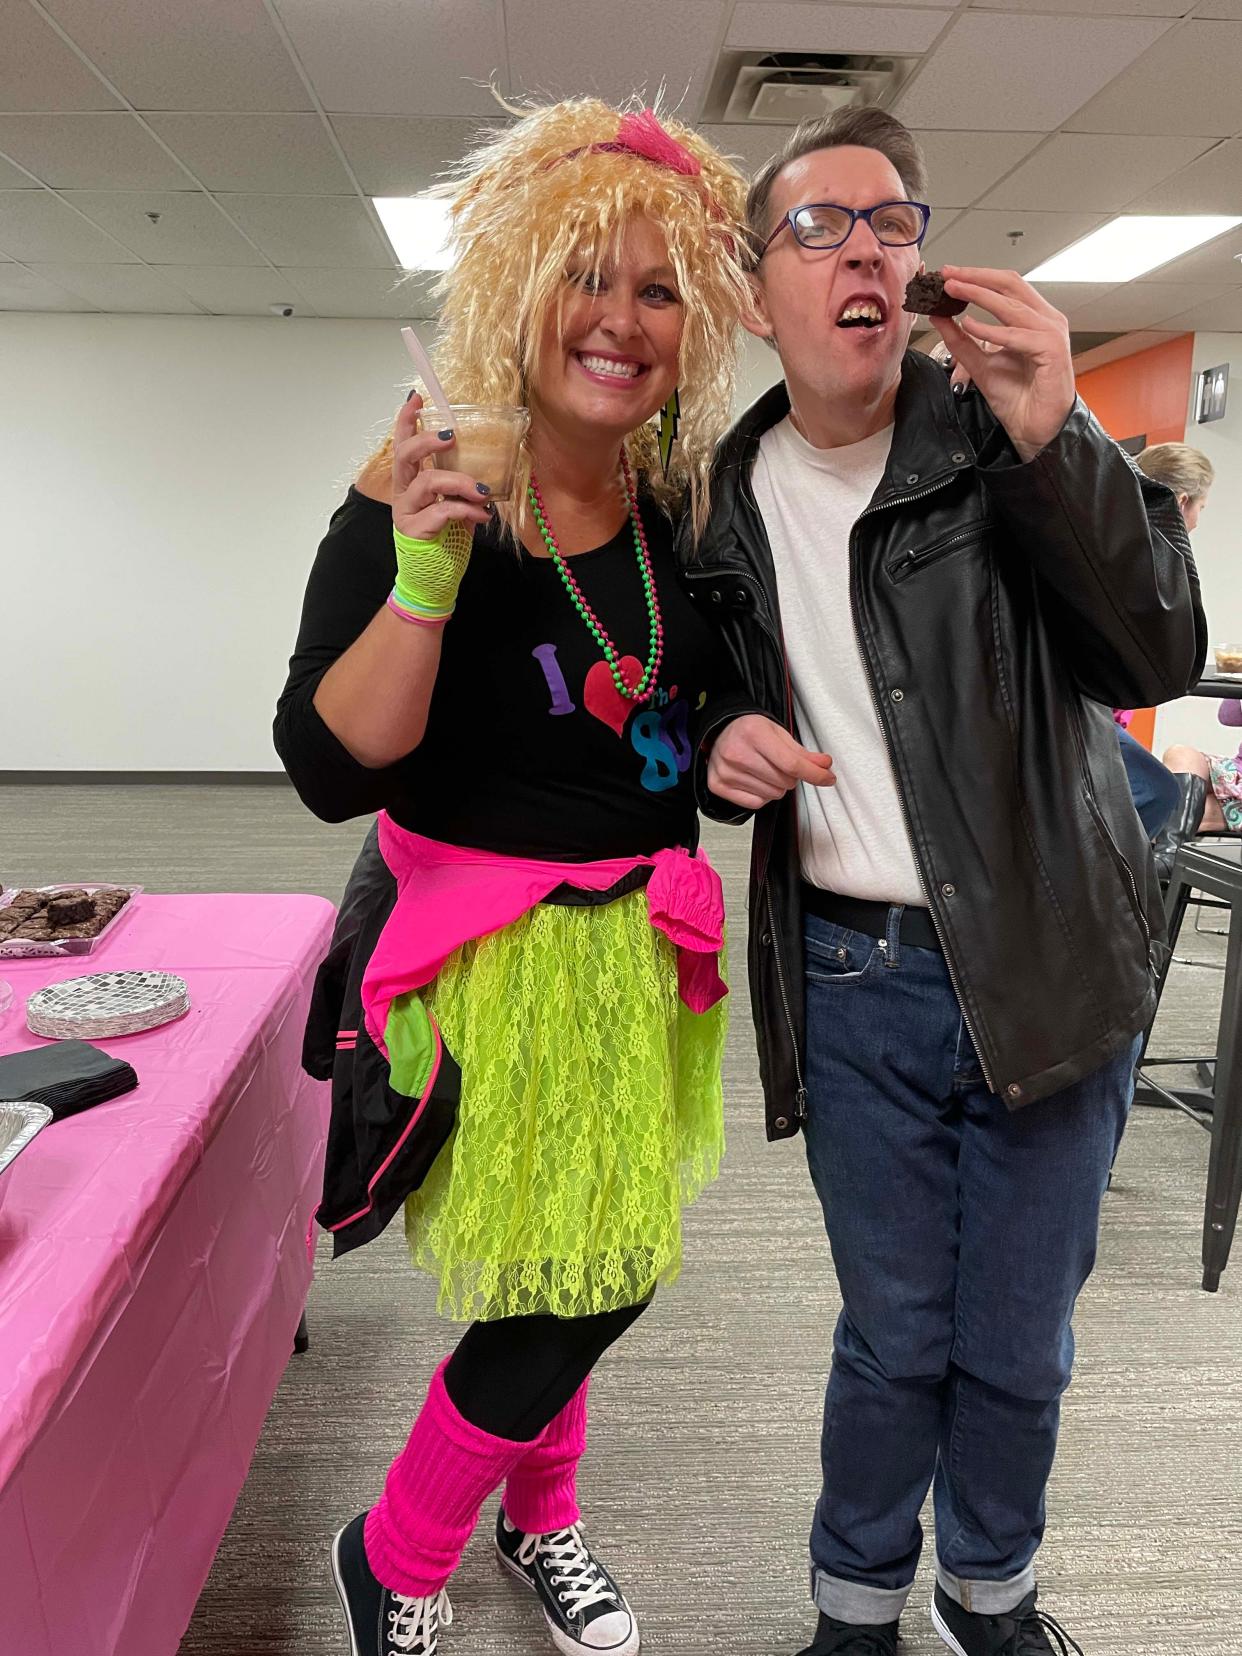 Dressed to impress and enjoying the snacks are Diane Knudsen (Helping Hands ministry at First Baptist Concord) with friend Josh Haddock at the Dancing Through the Decades event sponsored by Joni and Friends Nov. 11 at Fellowship Church on Middlebrook Pike.